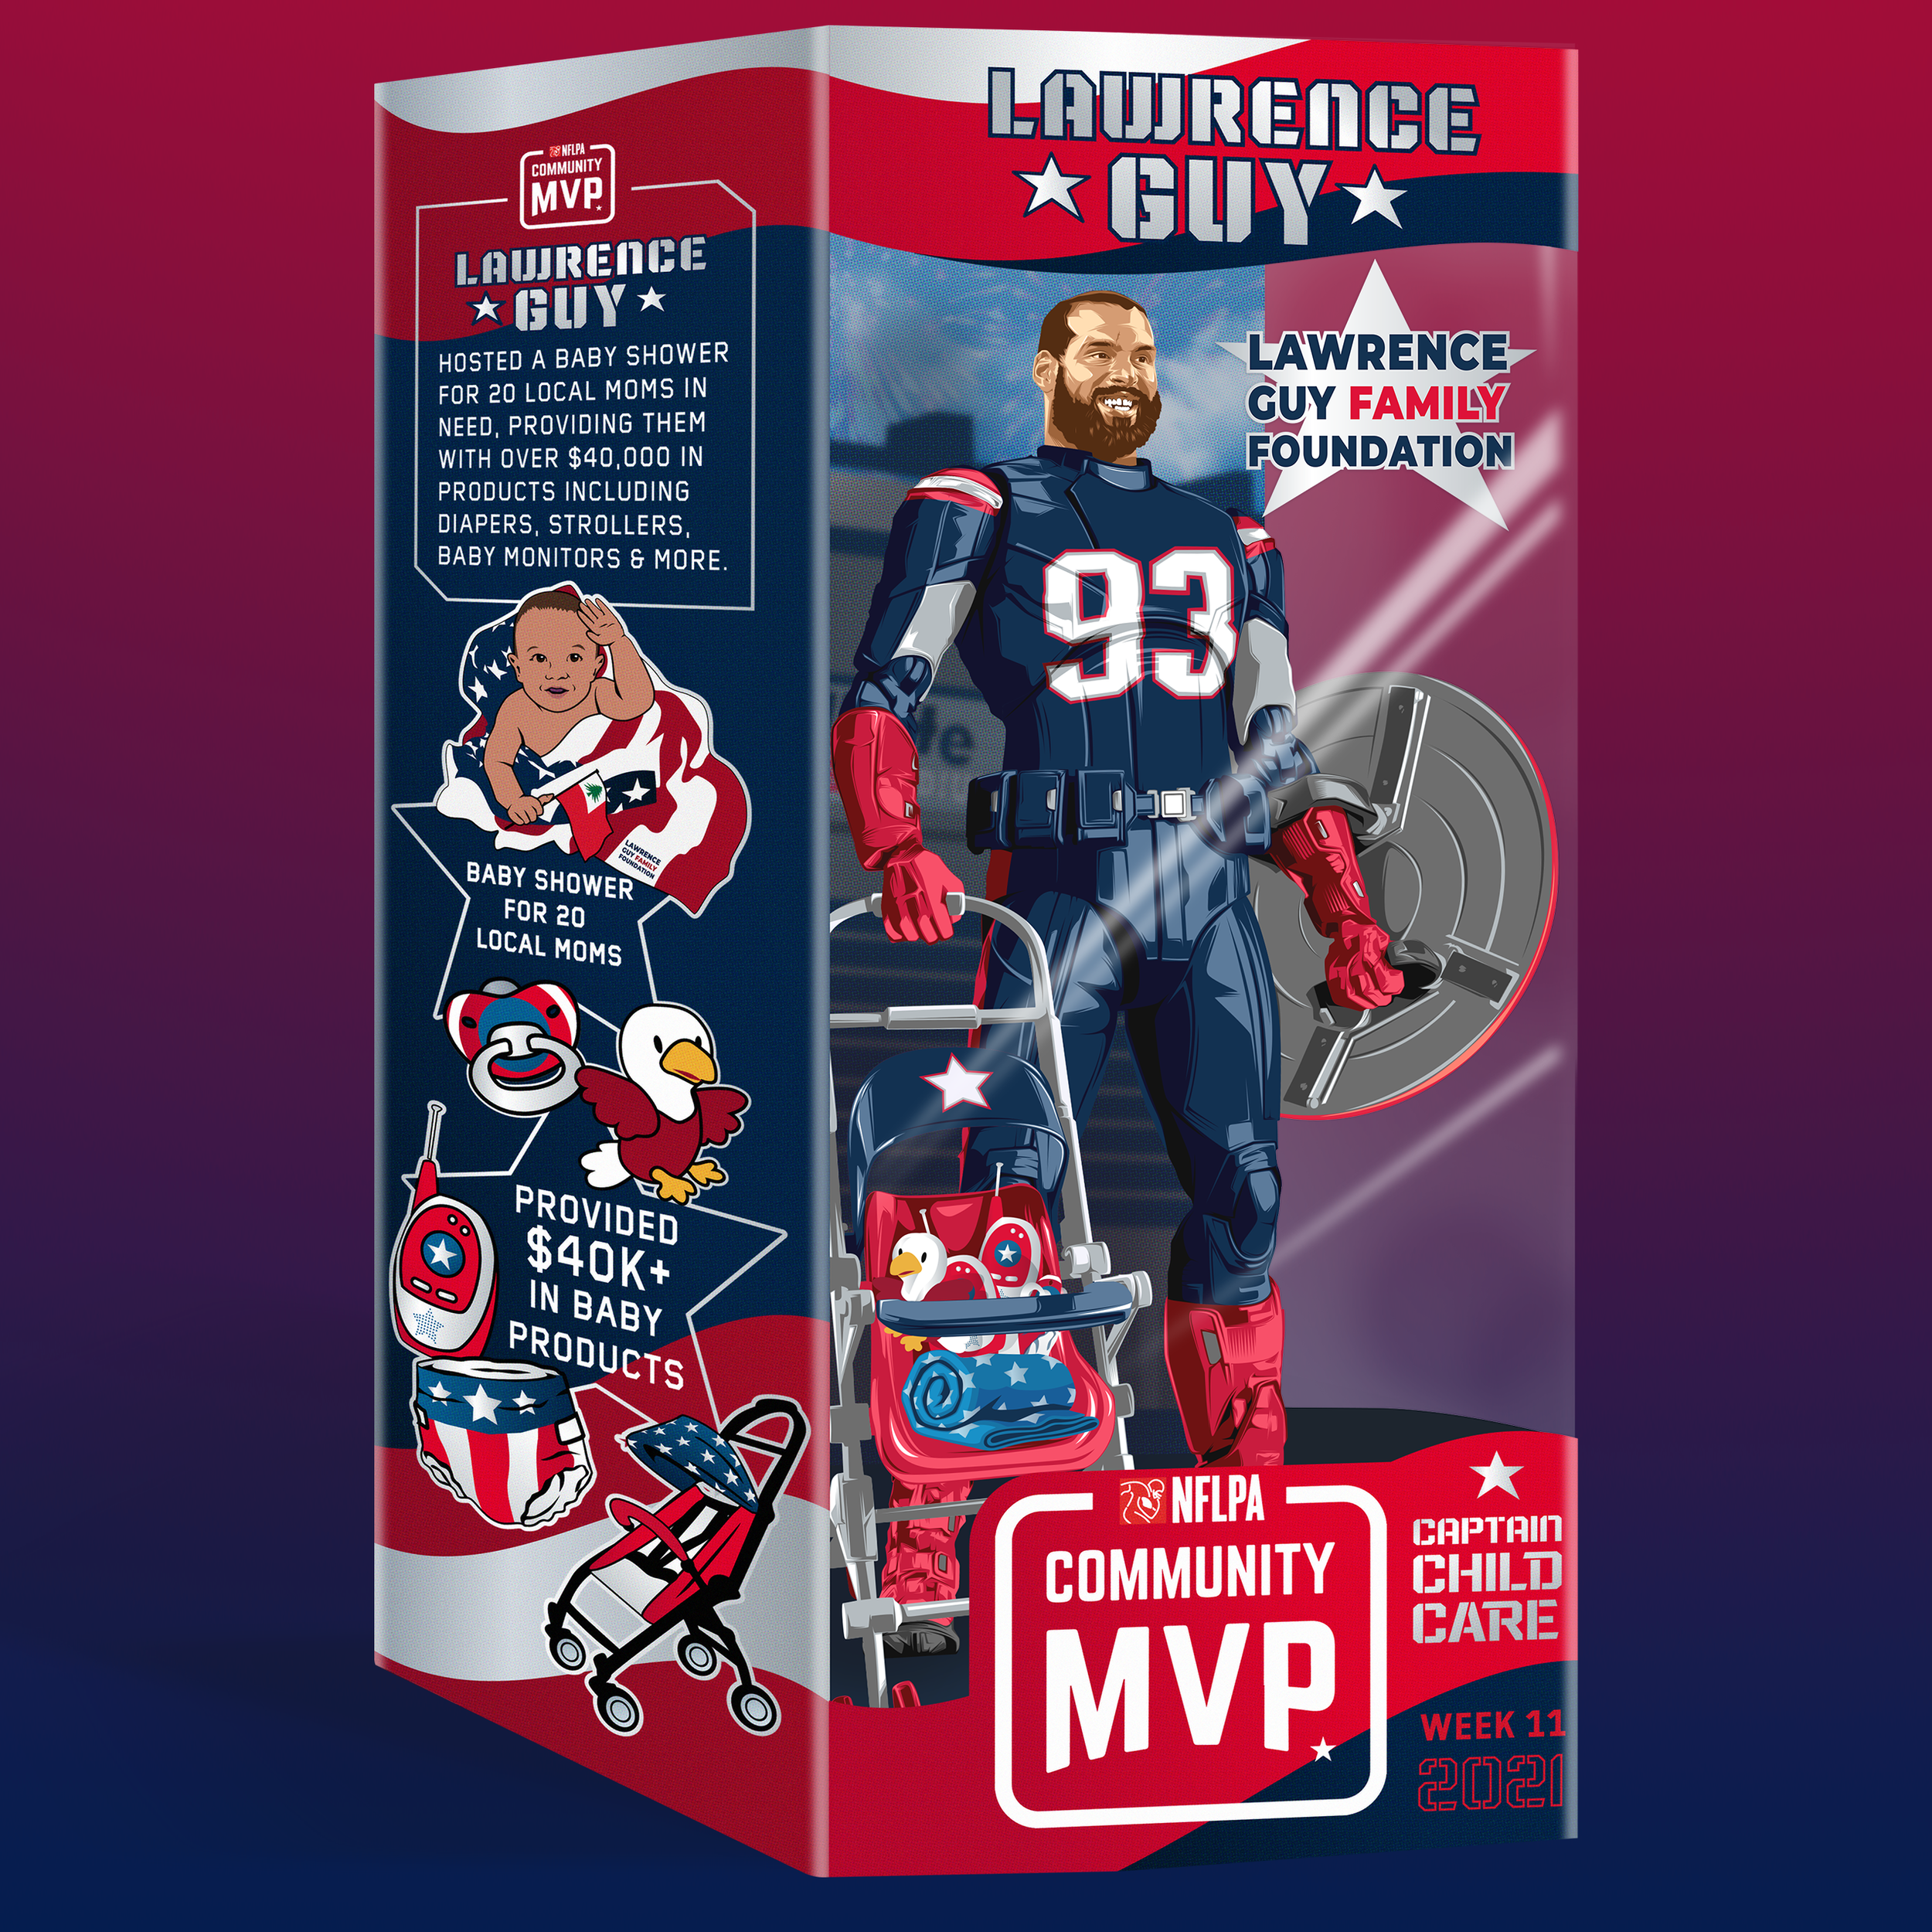 NFLPA_CMVP_W11_Lawrence_Guy_Williams-1x1.png